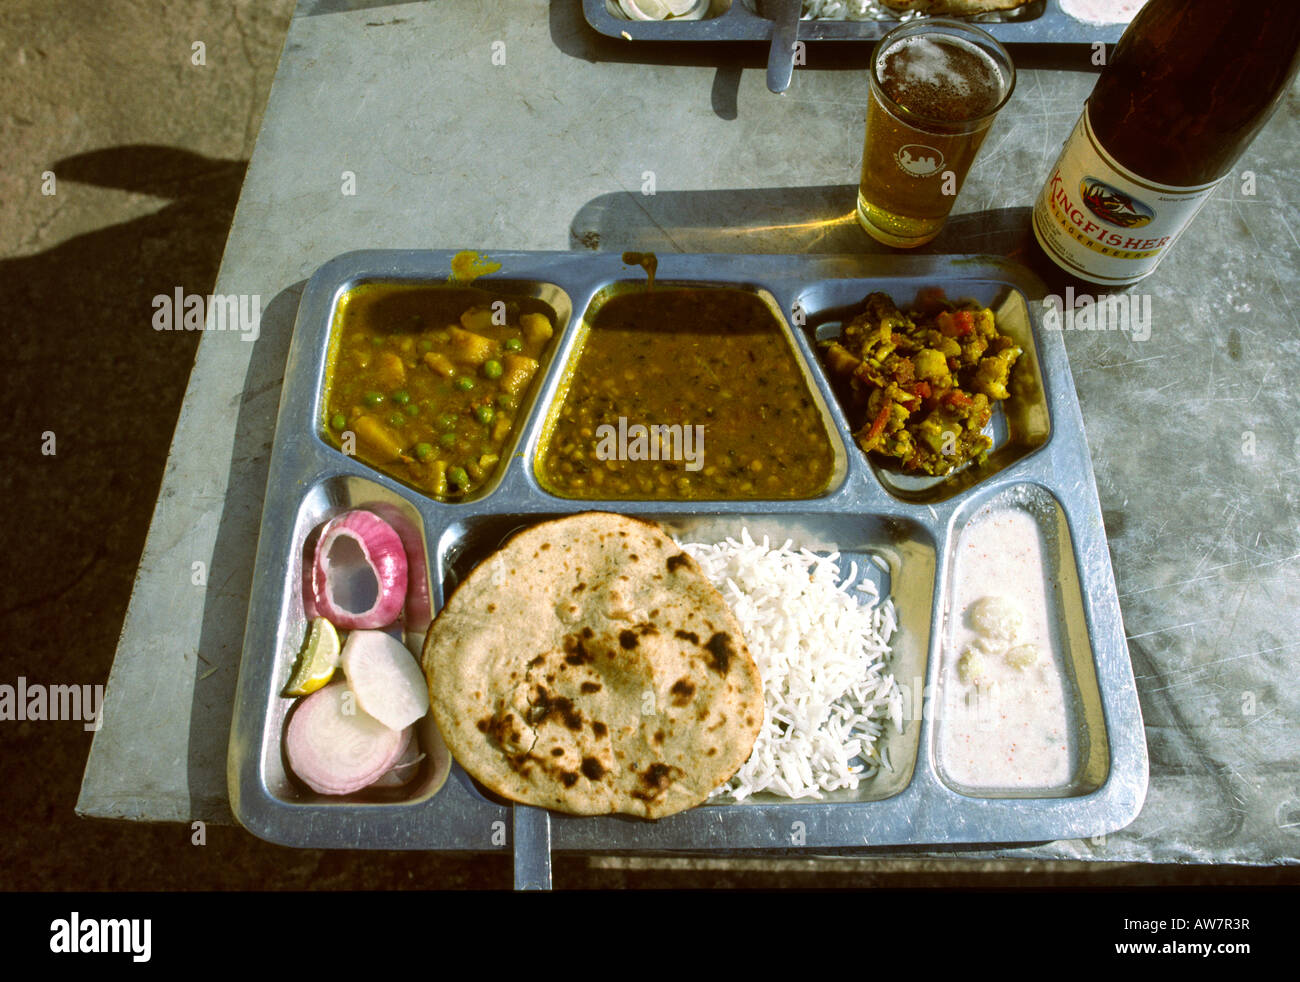 India Food typical thali tray meal Stock Photo